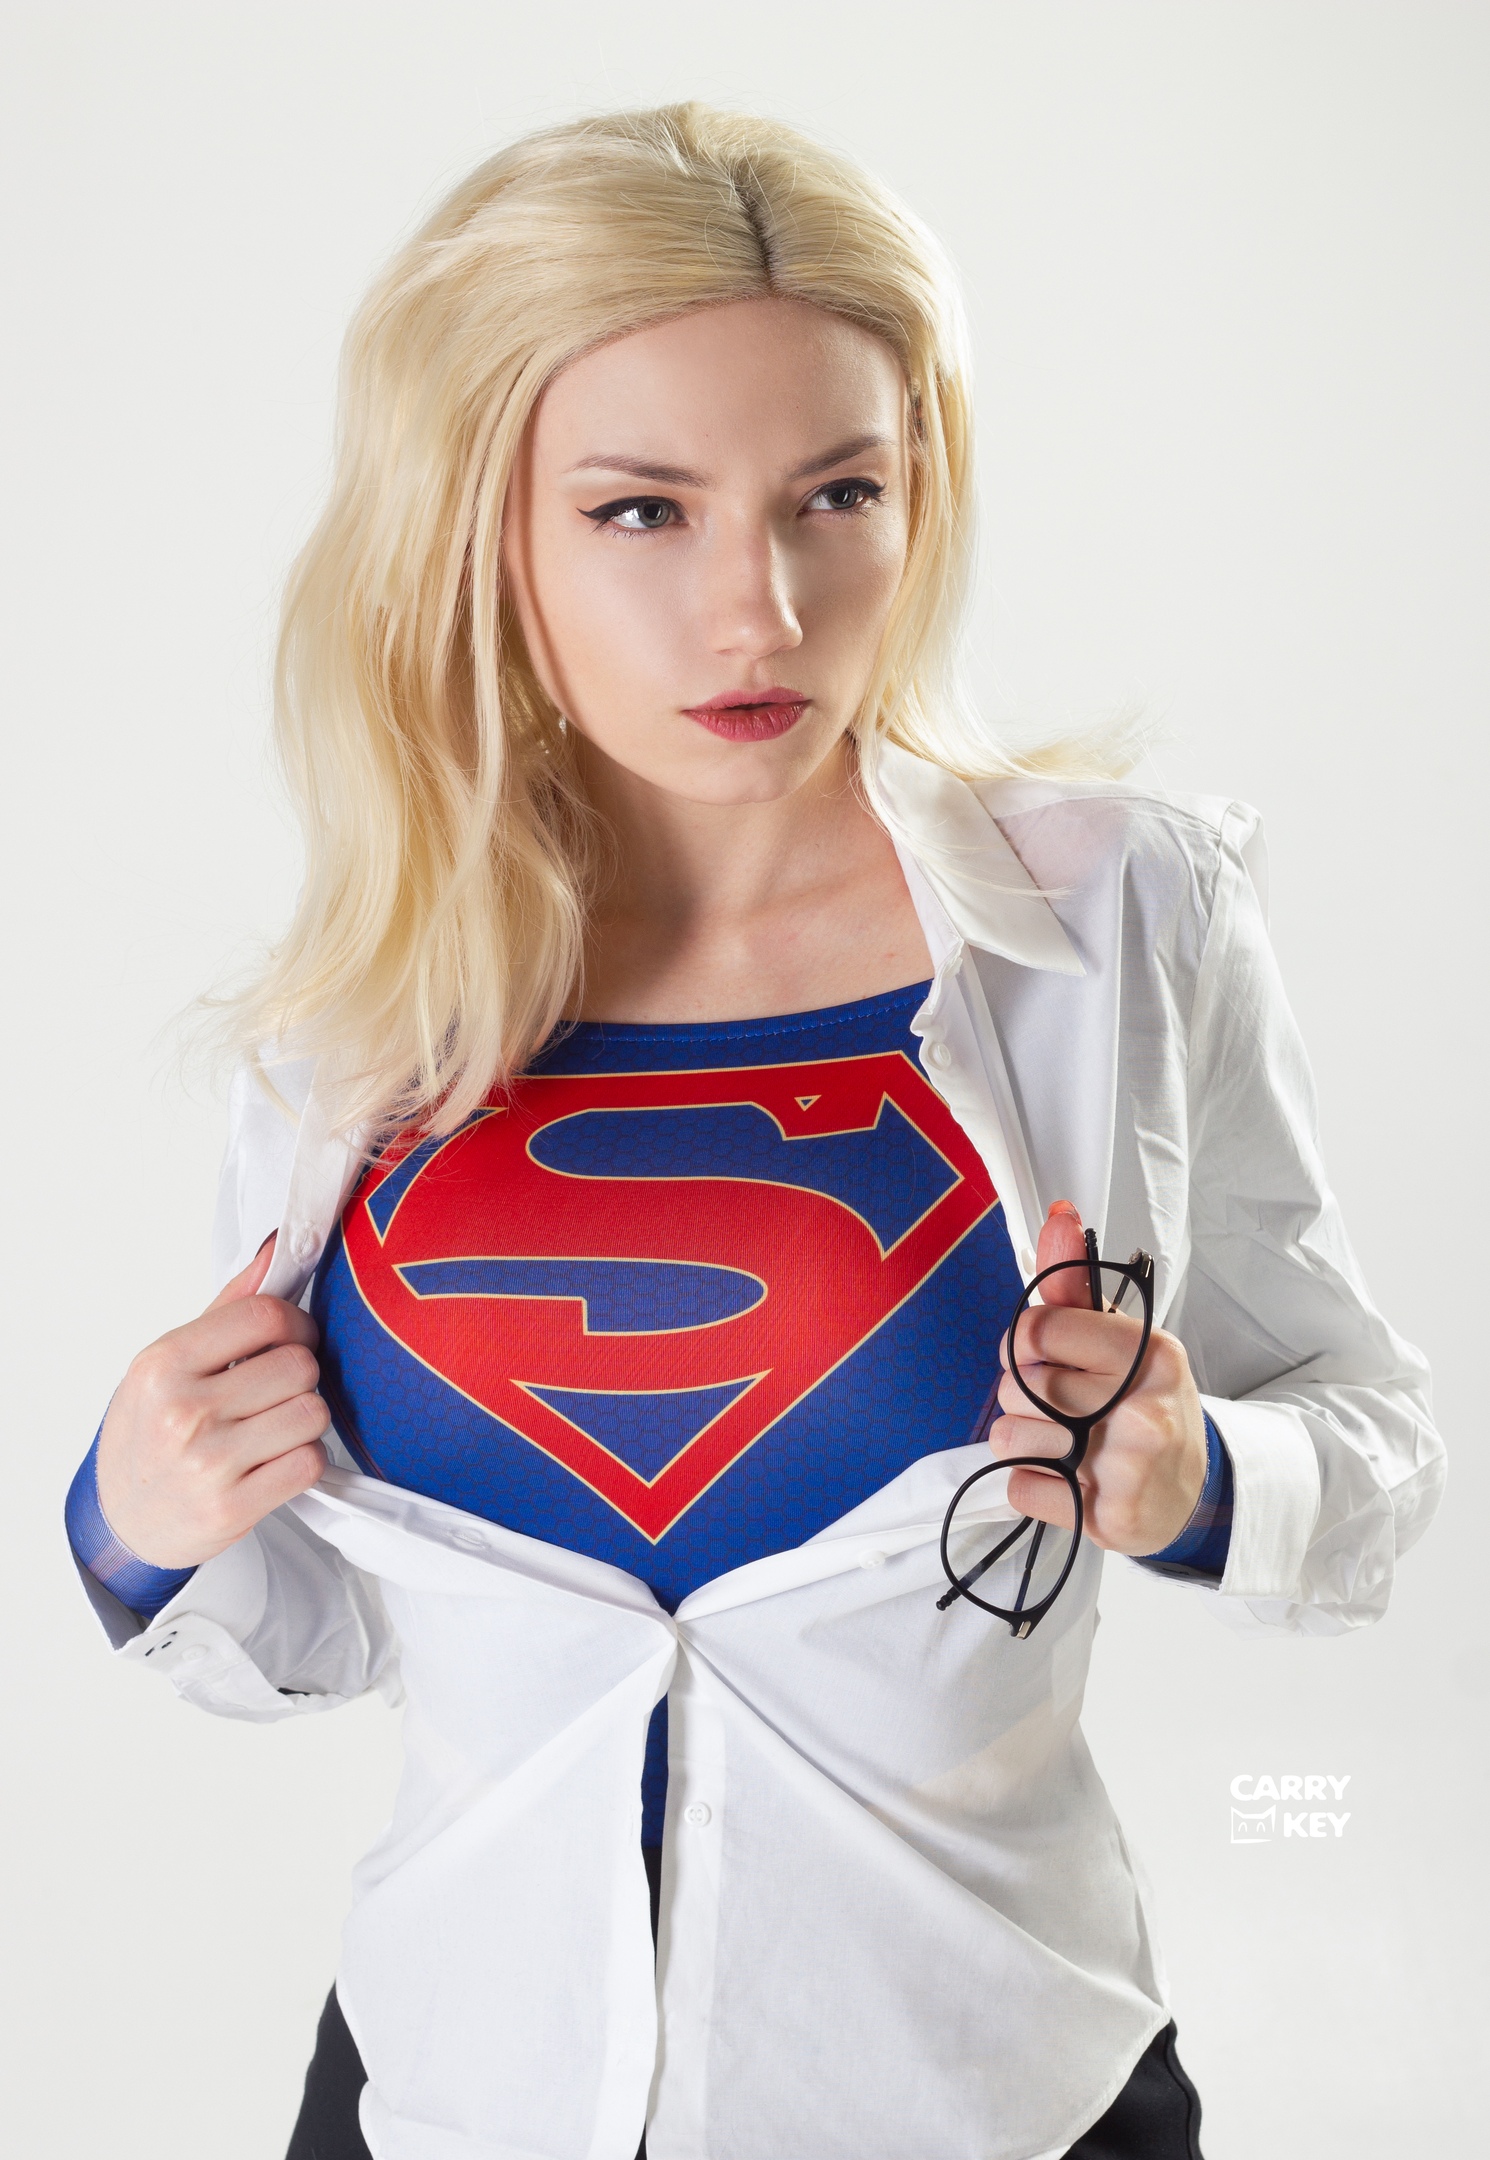 Supergirl Cosplay By CarryKey Boobies.